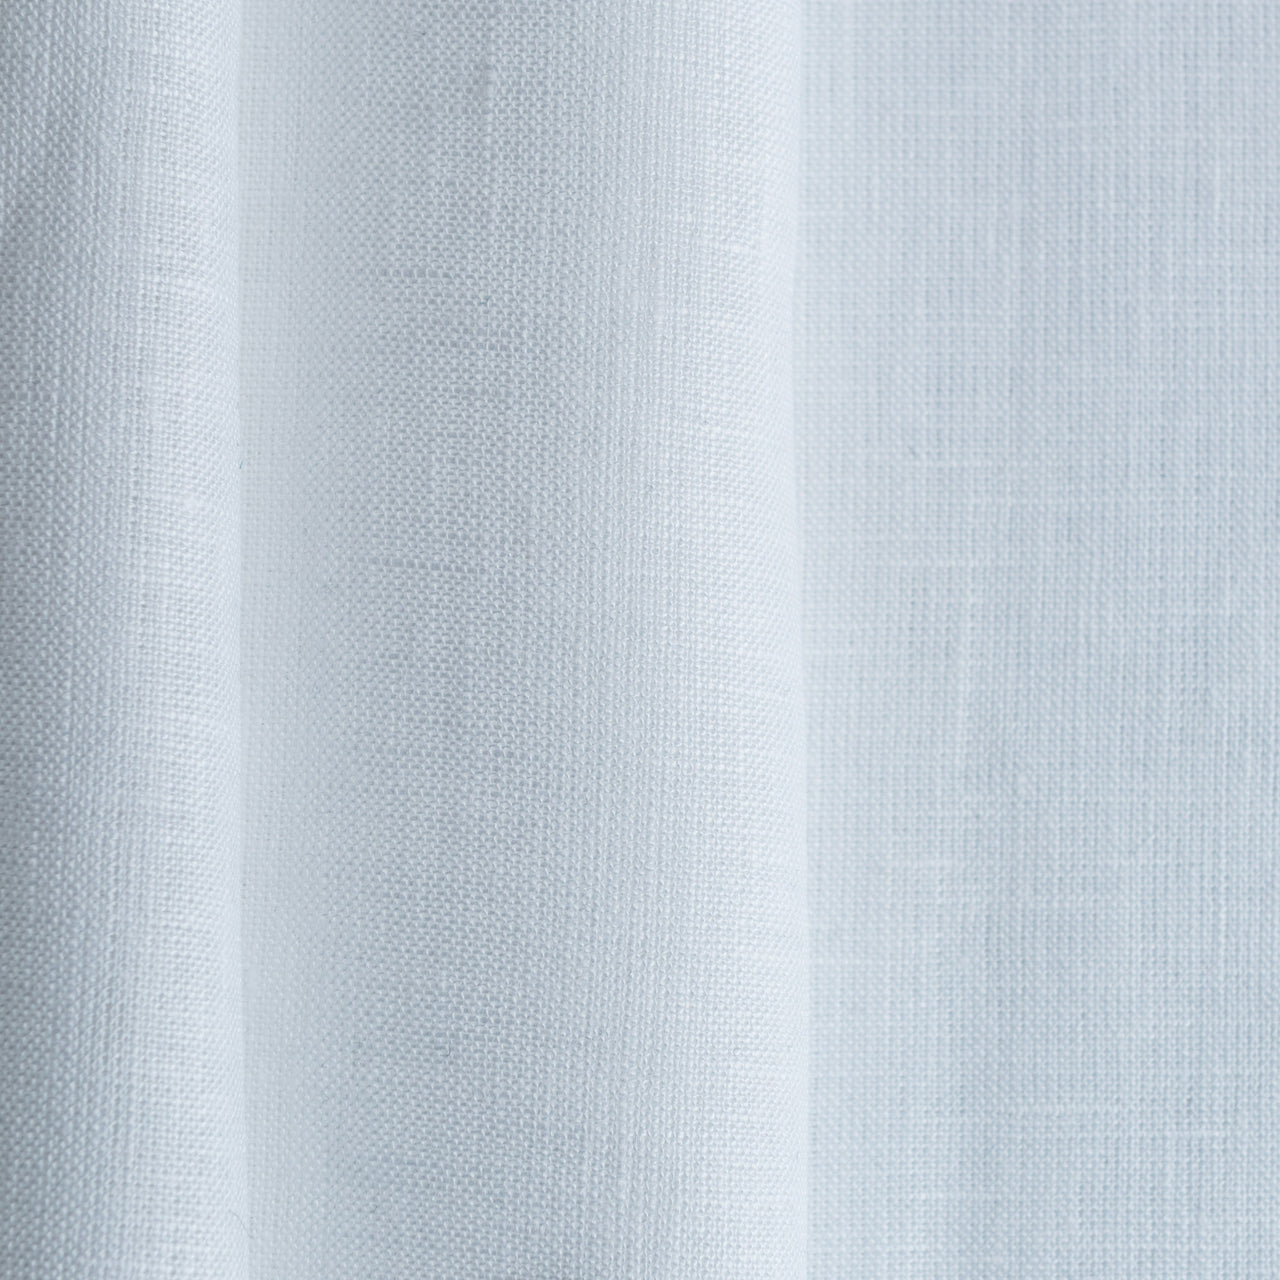 Black and White Color Block Tab Top Linen Curtain Panel with Cotton Lining - Cusom Width and Length, Color: White